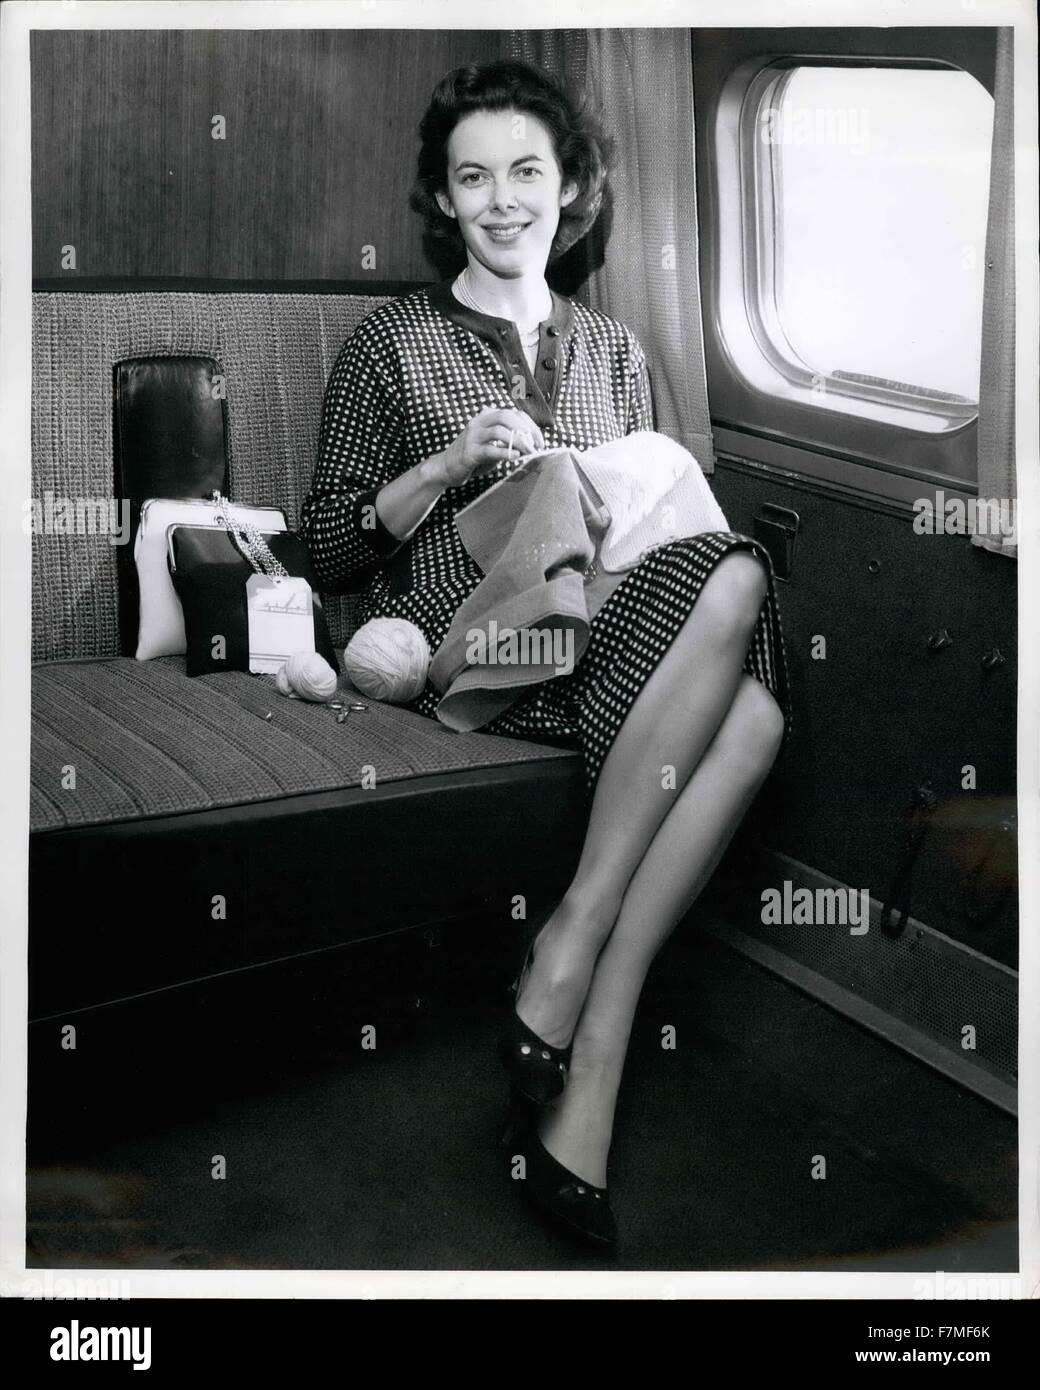 1959 - Popular TV and screen star Vanessa Brown is seen working on her needle-point pillow hobby on her arrival aboard on TWA jetsream from Los Angeles. She's here for two days of conference regarding future television and stage appearances in New York. Miss Brown she learned her relaxing hobby several years ago in France. © Keystone Pictures USA/ZUMAPRESS.com/Alamy Live News Stock Photo